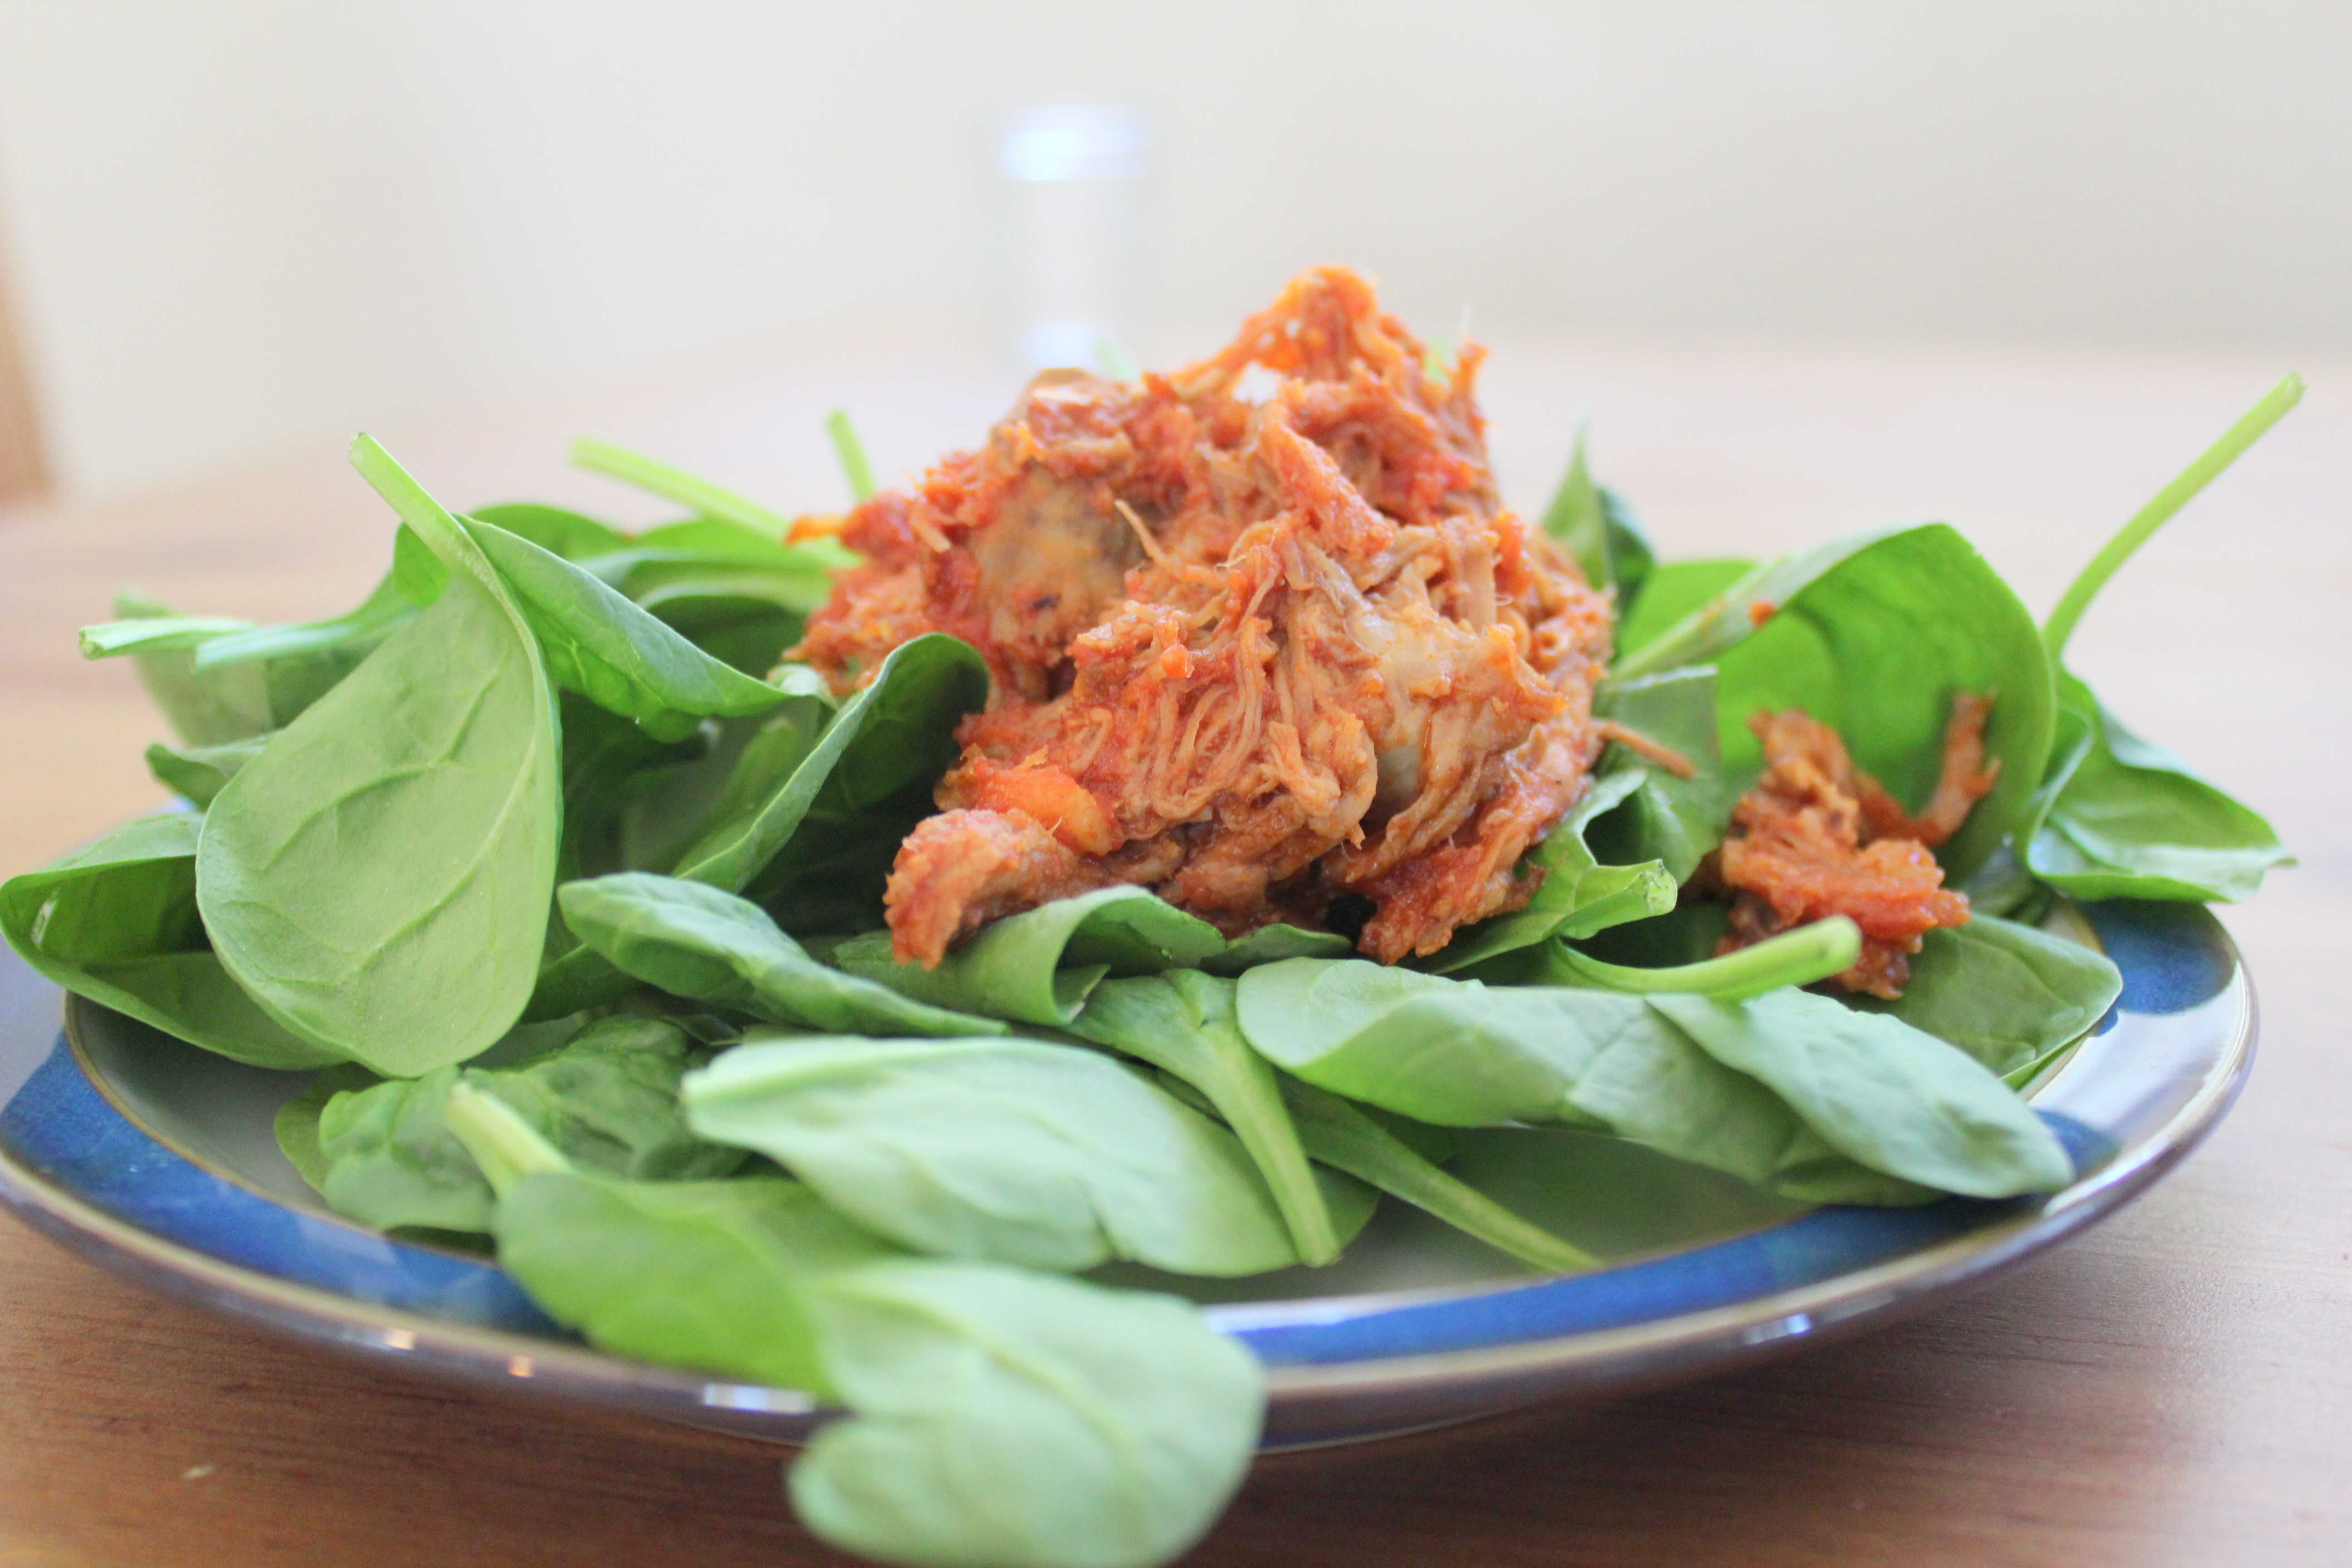 BBQ Pulled Pork Over a Bed of Spinach – easy crockpot recipe (GAPS legal)